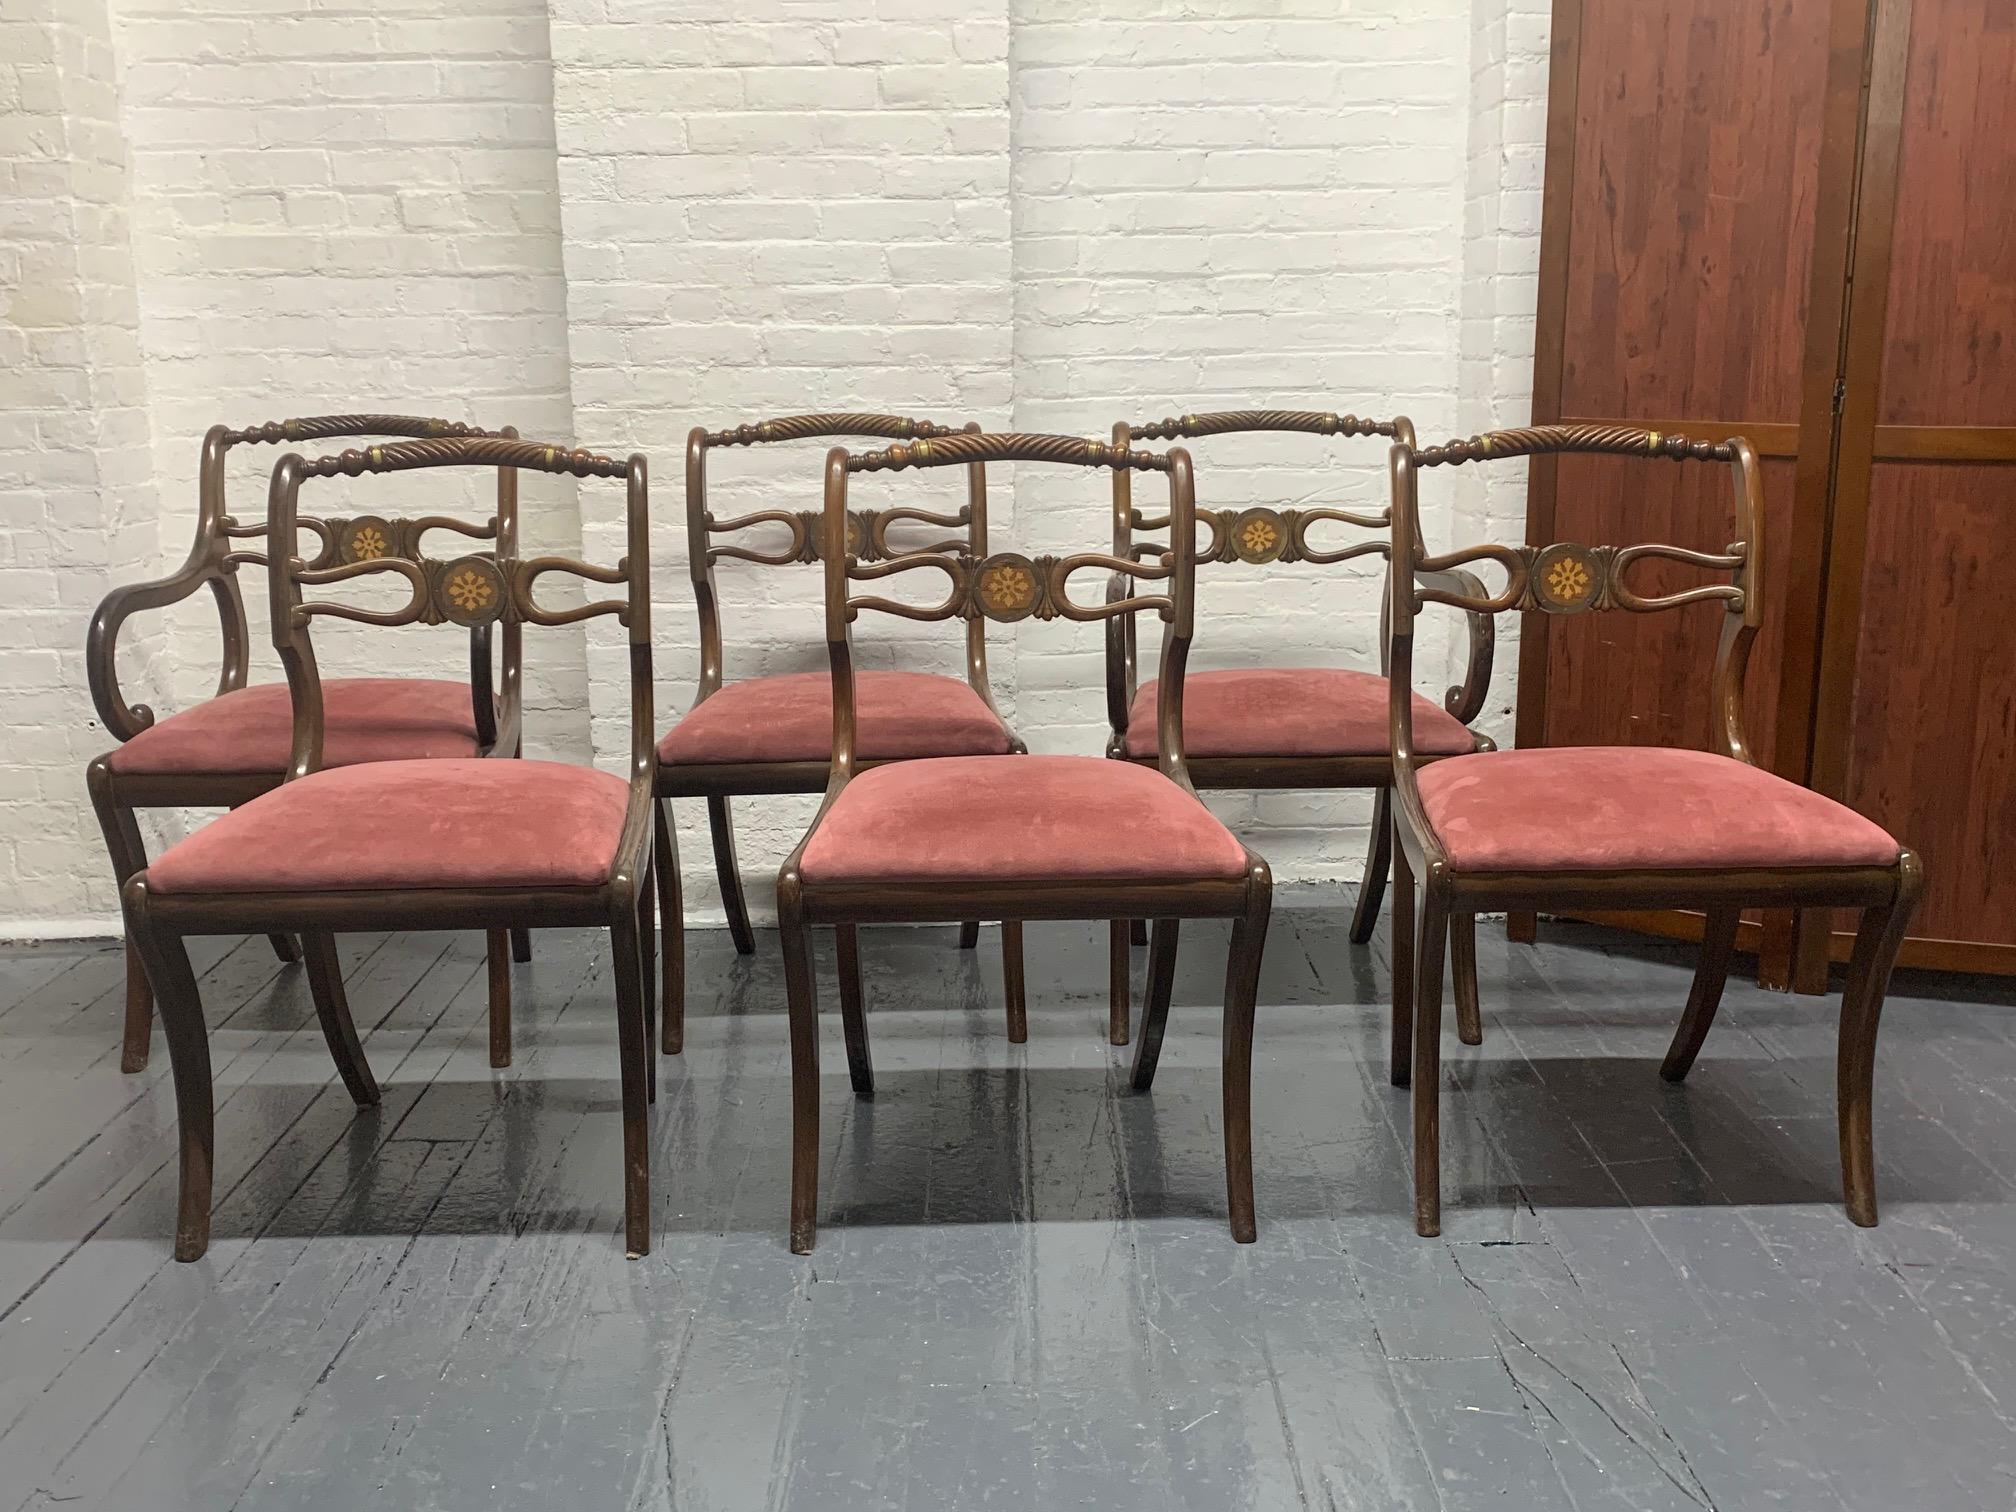 Six rosewood English Regency style dining room chairs. The seats are suede upholstery, have brass trimming and the back of the chairs has inlay pattern. 

Armchairs measures: 34 H x 20.5 D x 21 W. Arm height 25.5
Without arms: 34.5 H x 21 W x 20